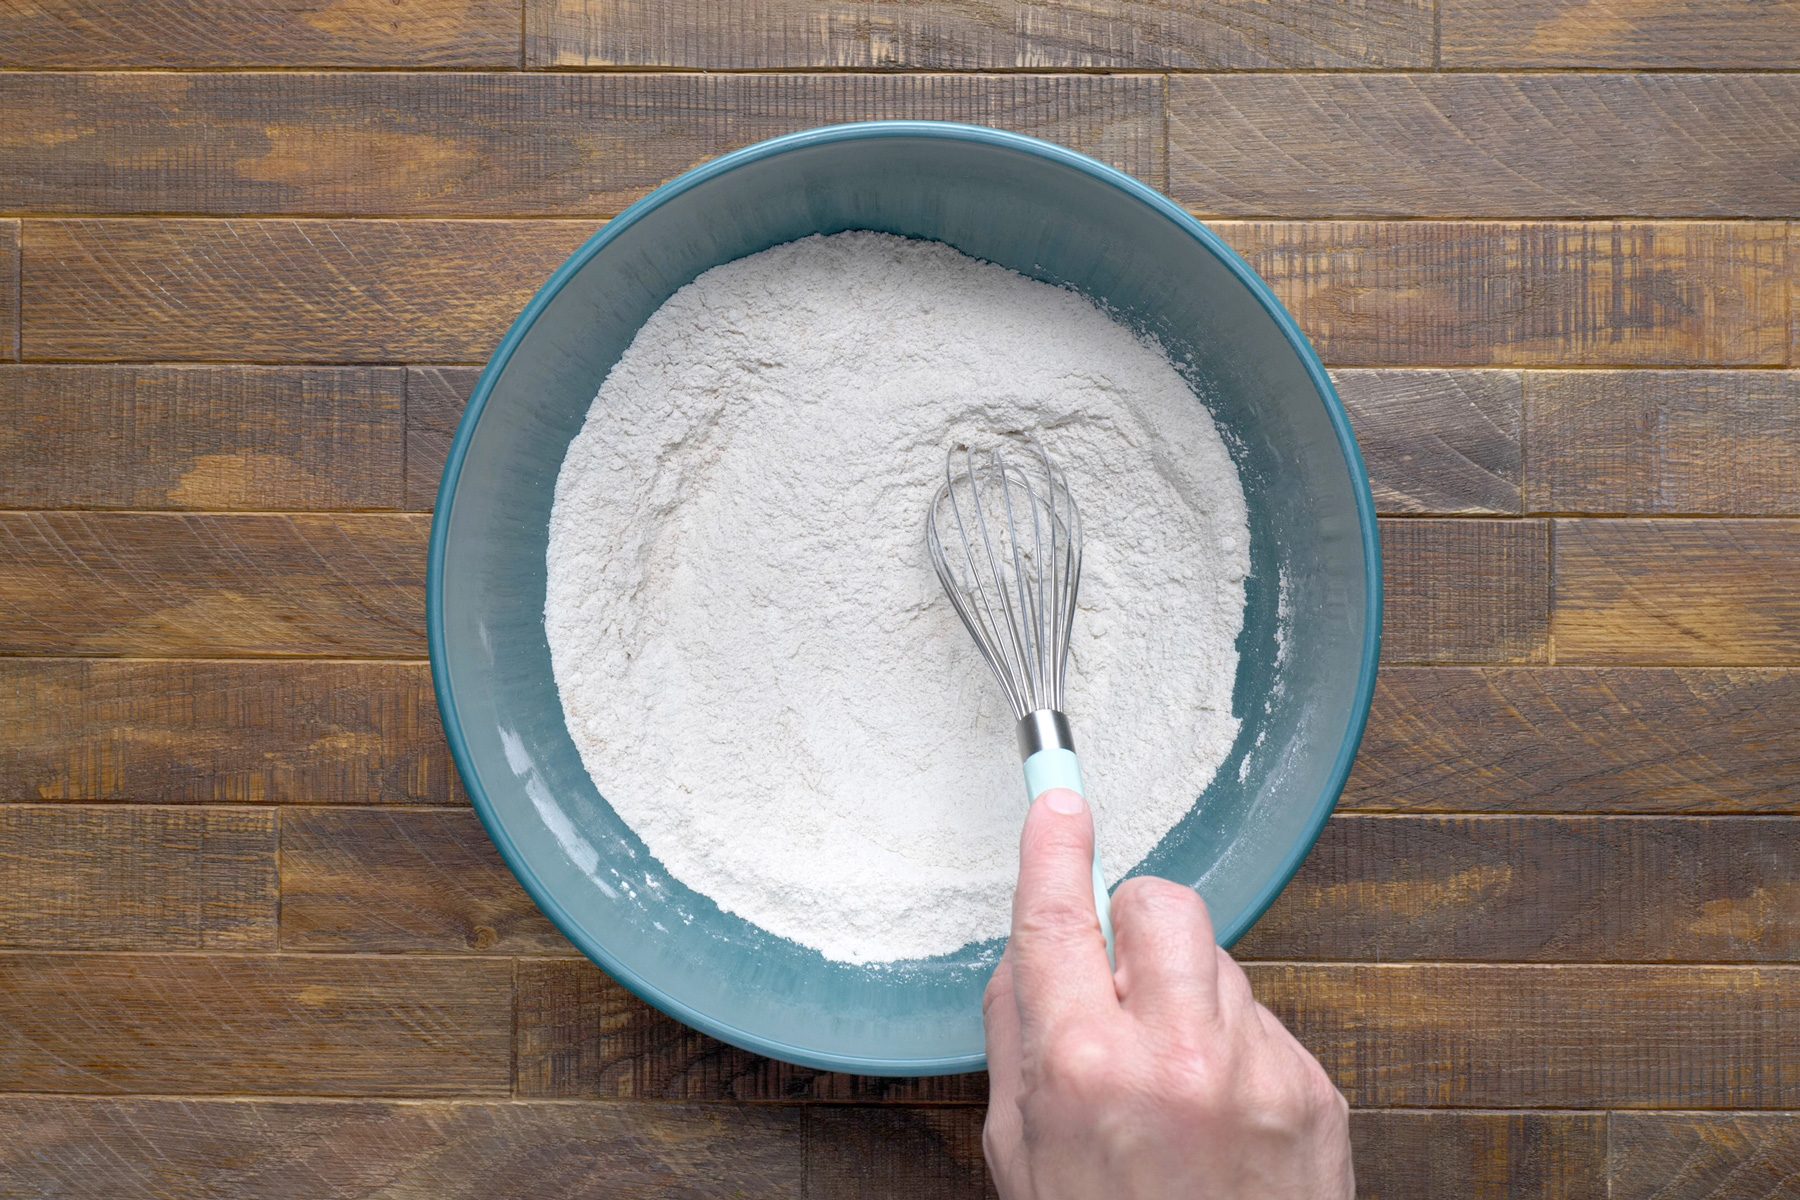 A hand using a whisk to mix dry ingredients